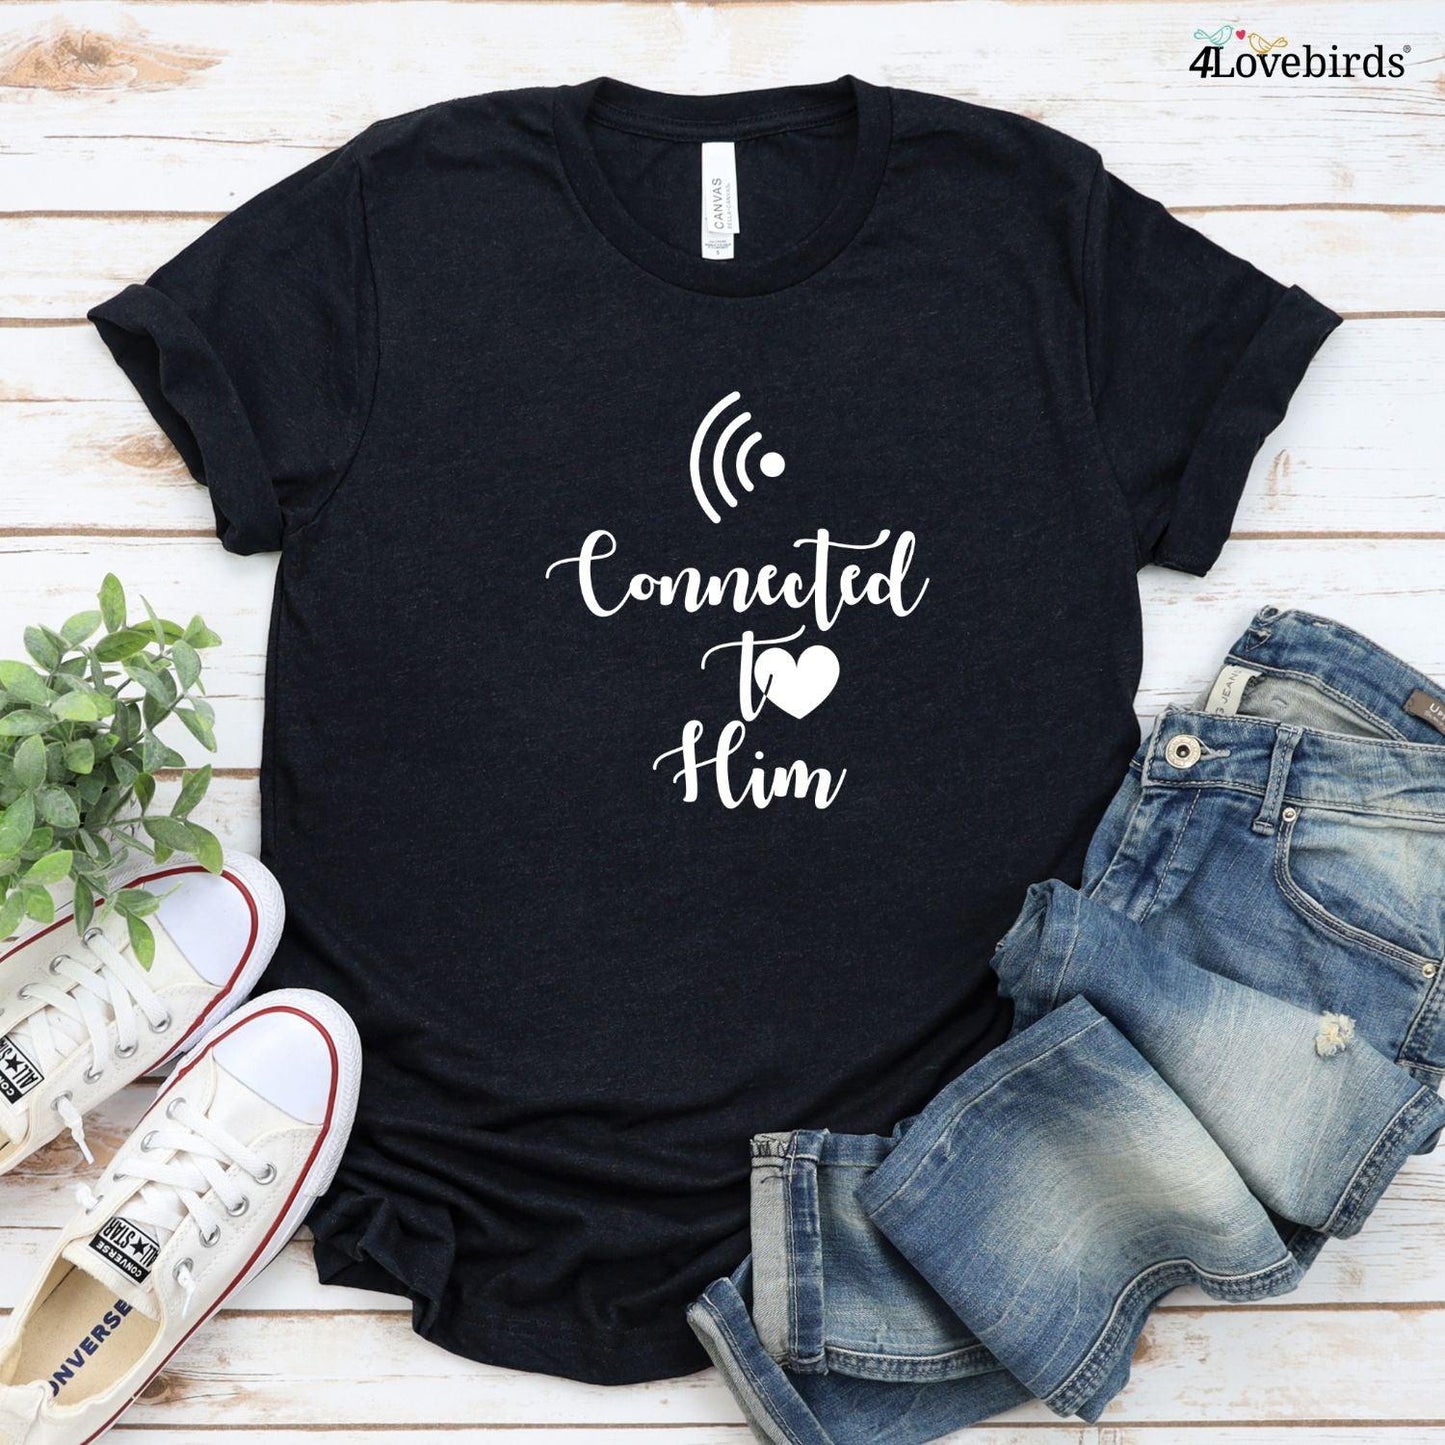 Matching Set: Humorous Couple's Outfits, Connected Geek Apparel, Perfect Gift Idea! - 4Lovebirds